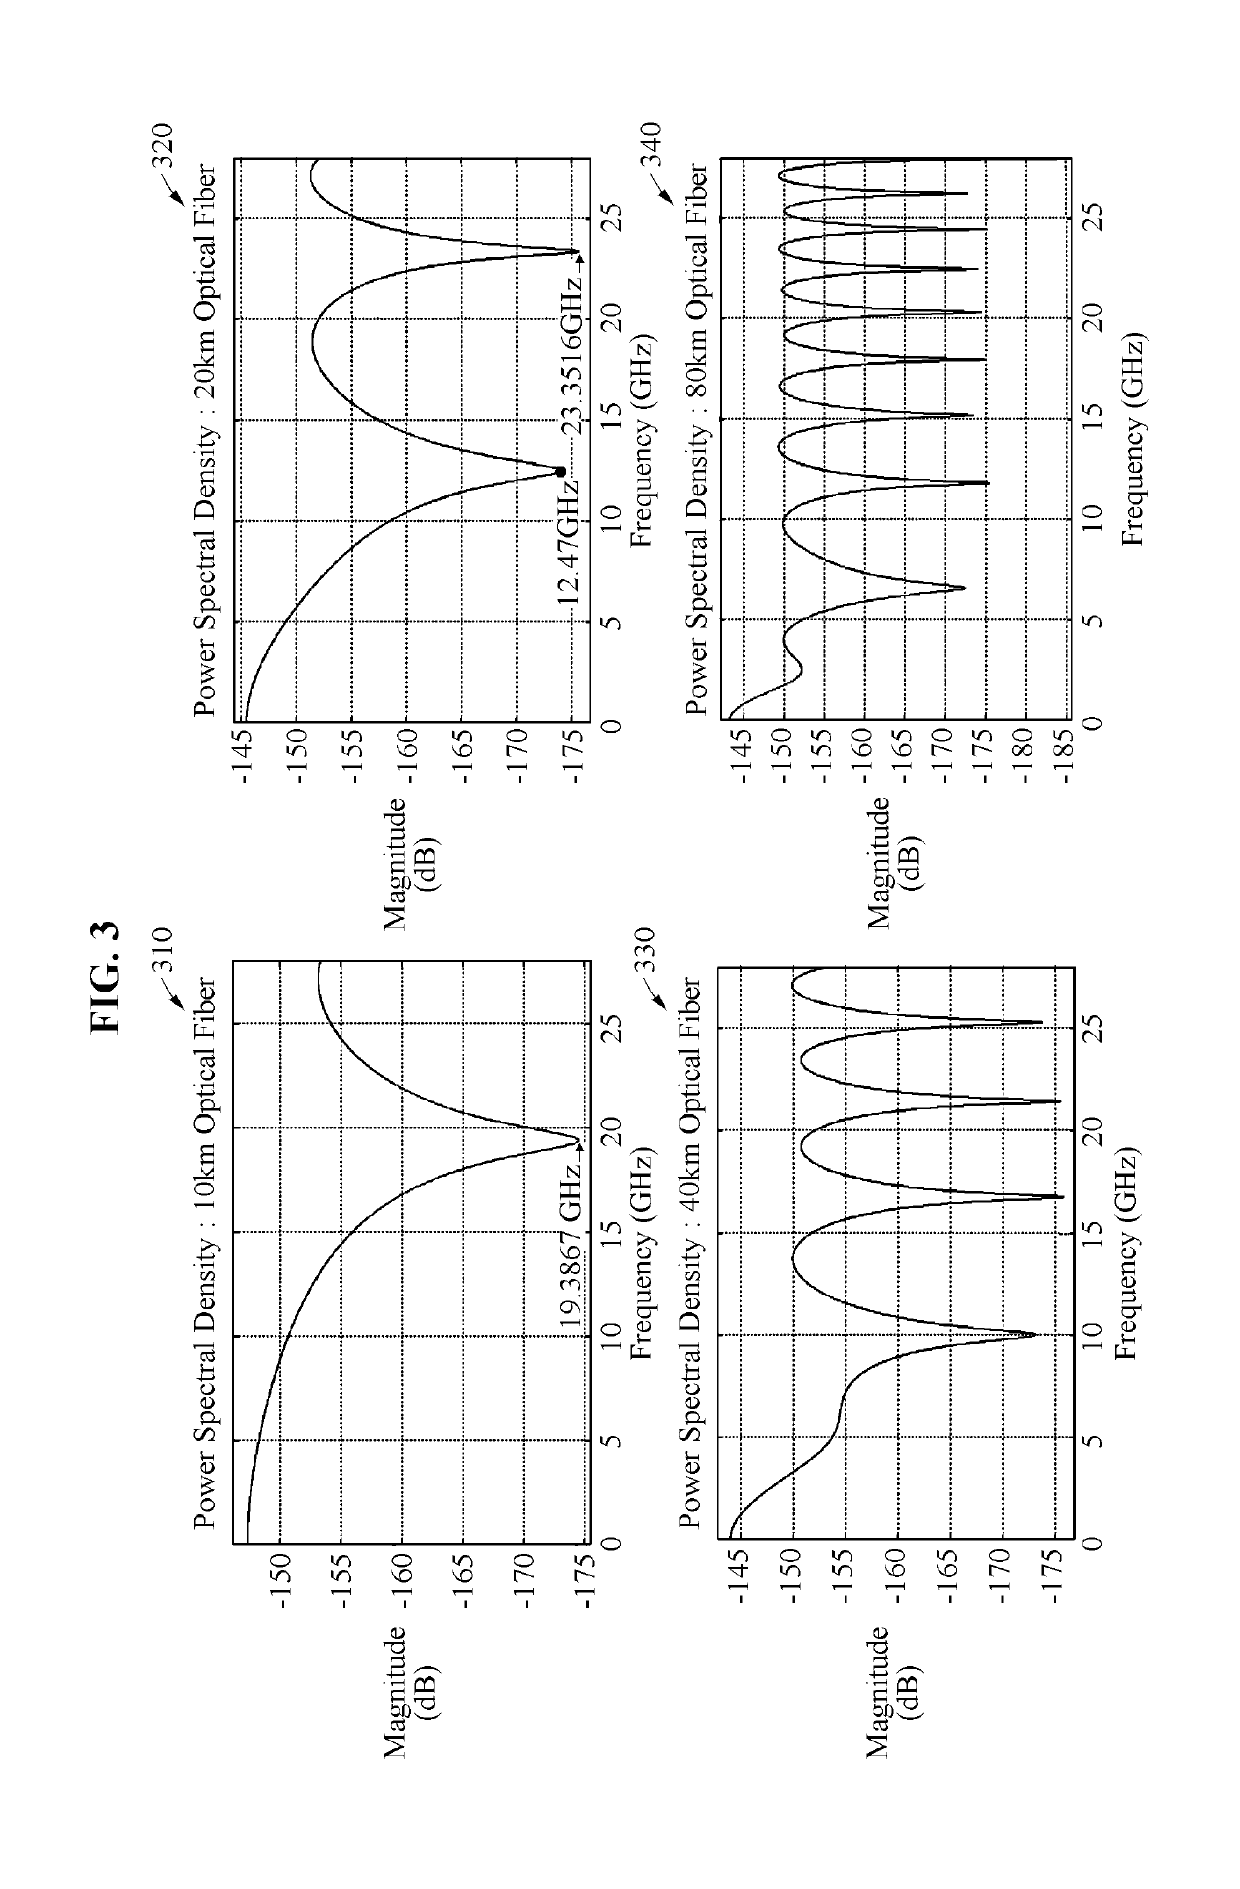 Apparatus and method for equalization and compensation of chromatic dispersion in optical transmission